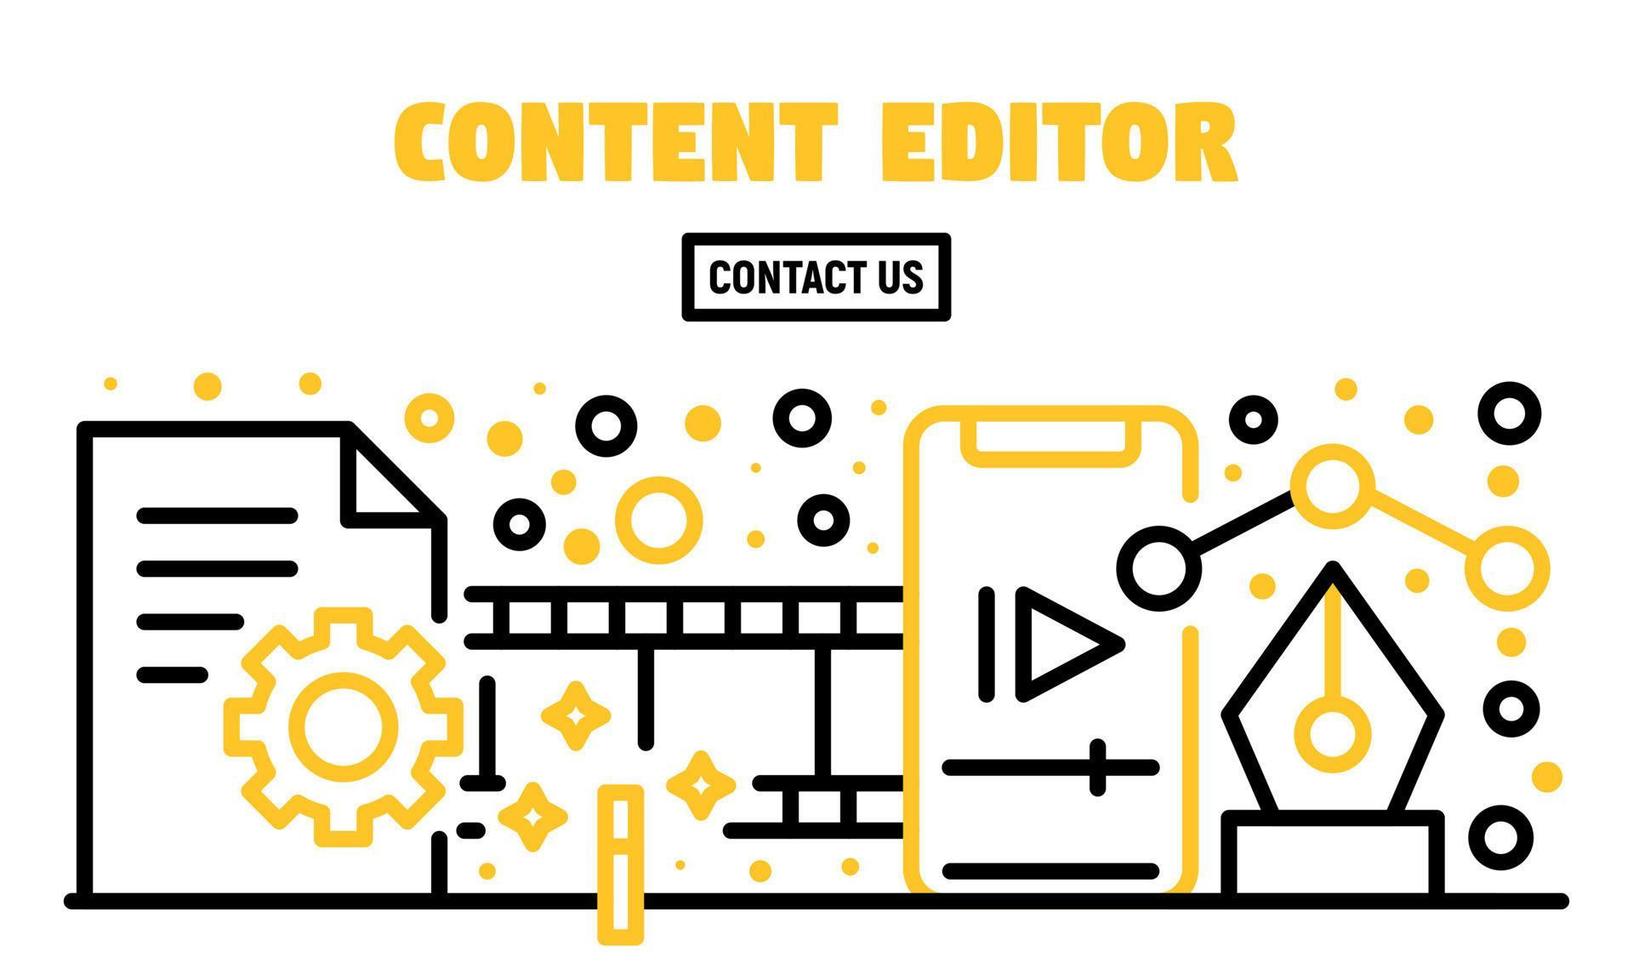 Content editor banner, outline style vector